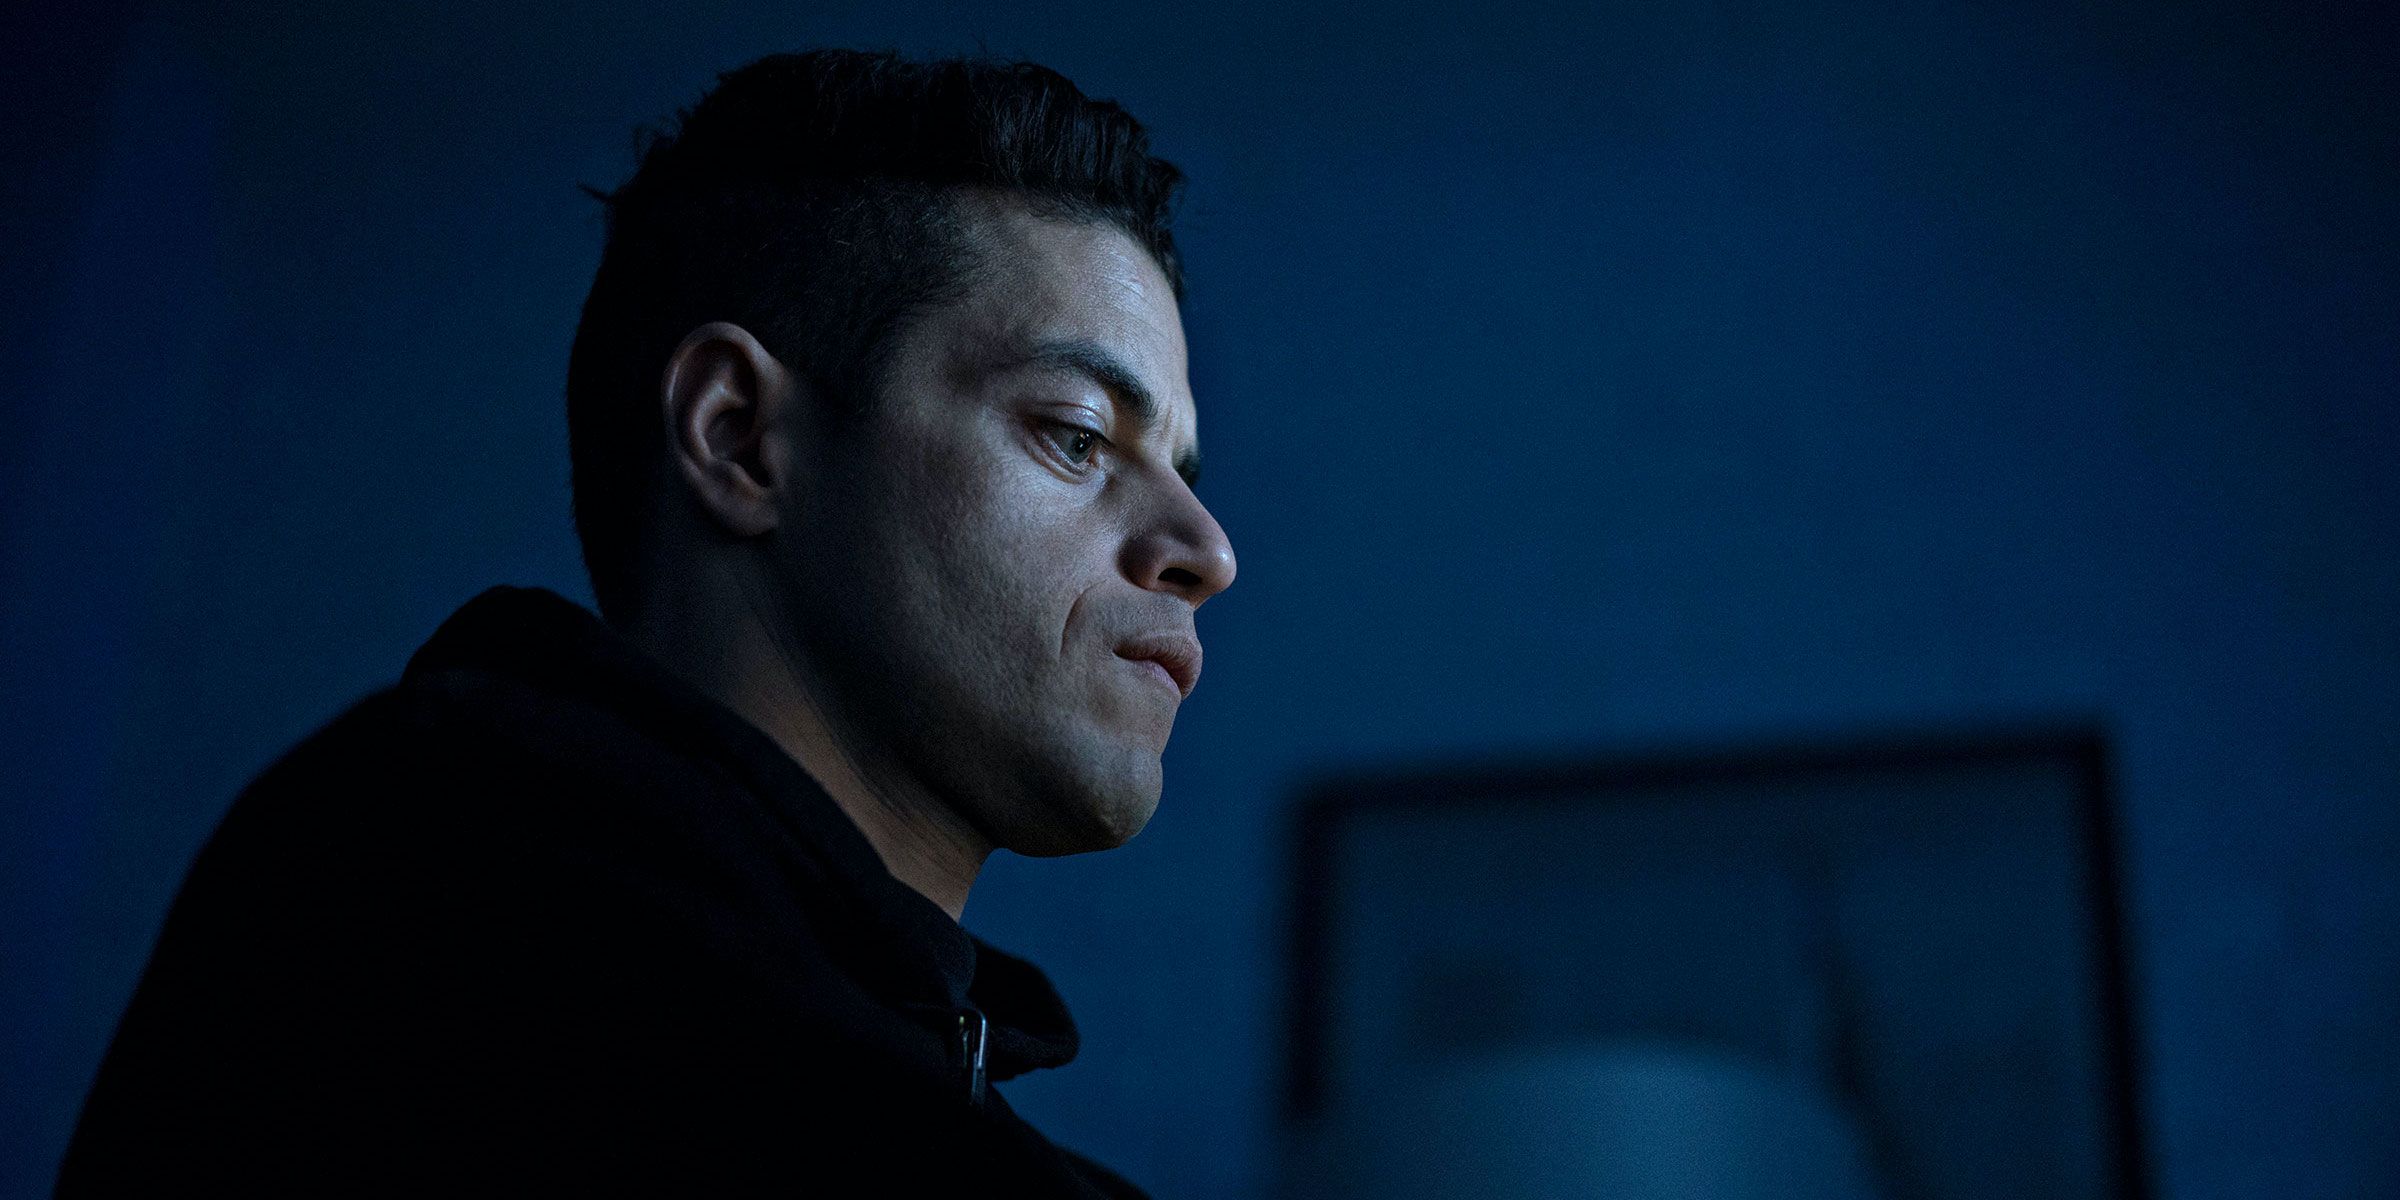 Rami Malek in Mr. Robot on a dark background, looking at his computer.